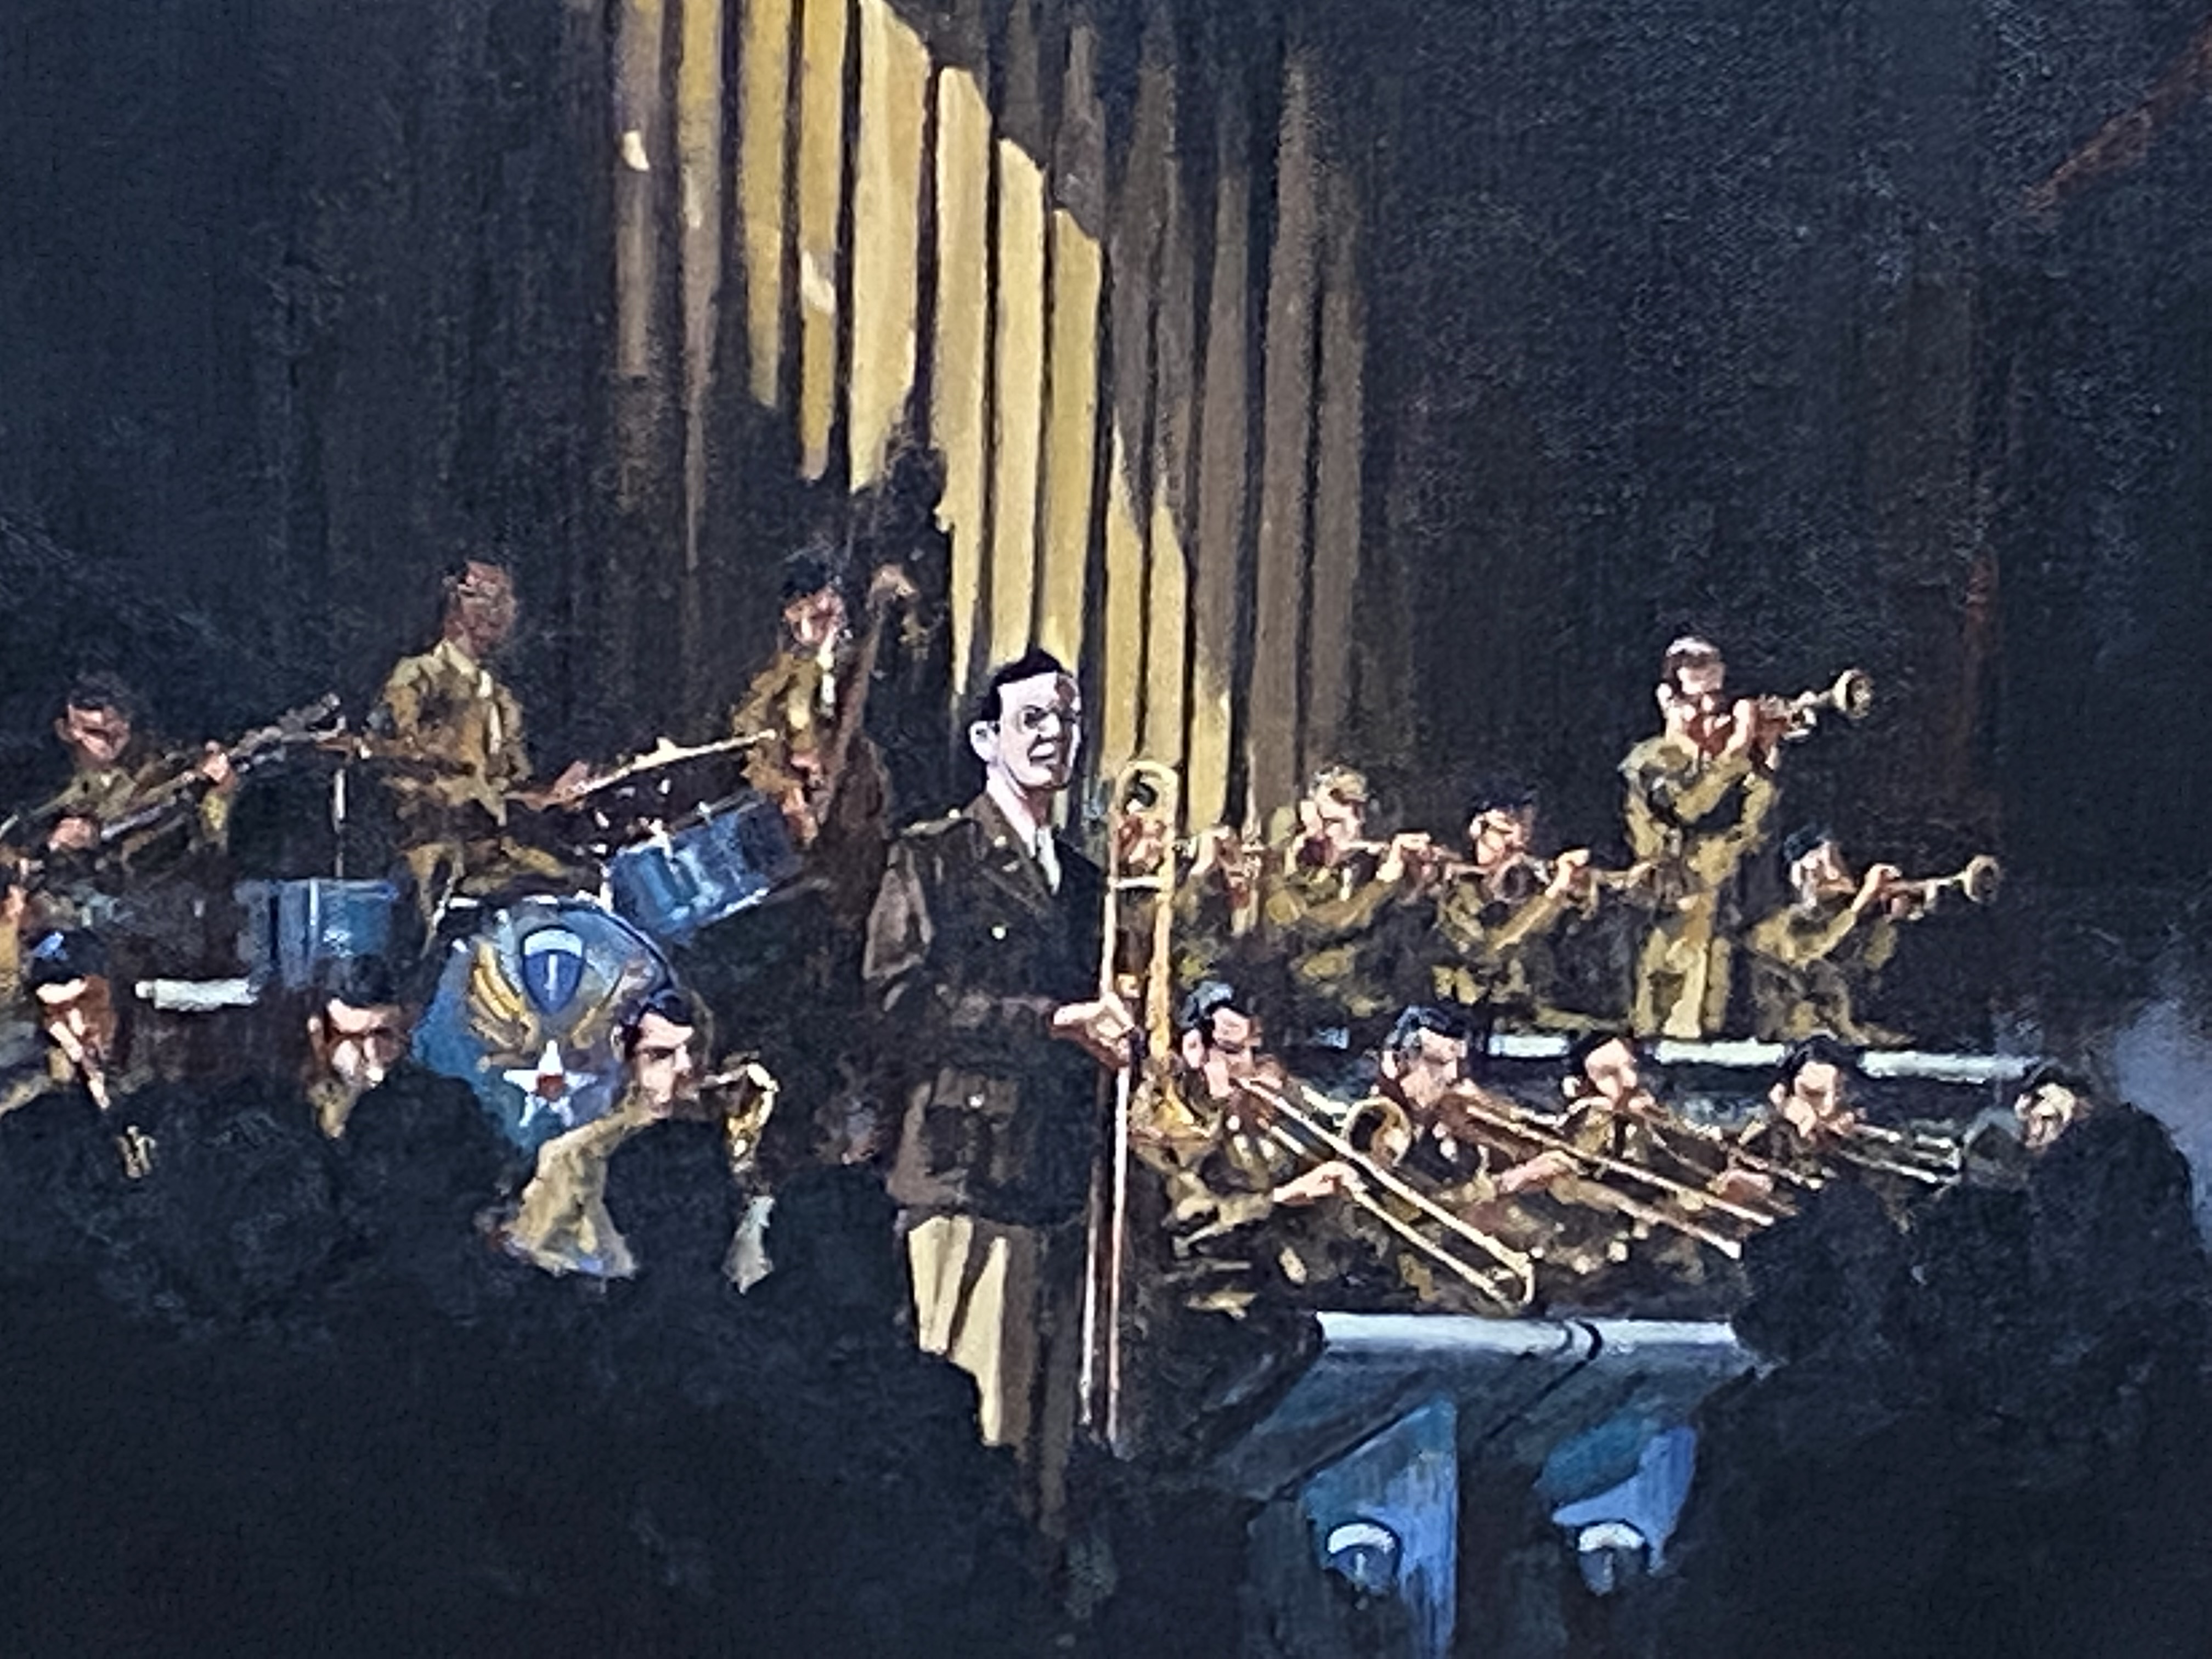 Framed and glazed canvas of an American big band